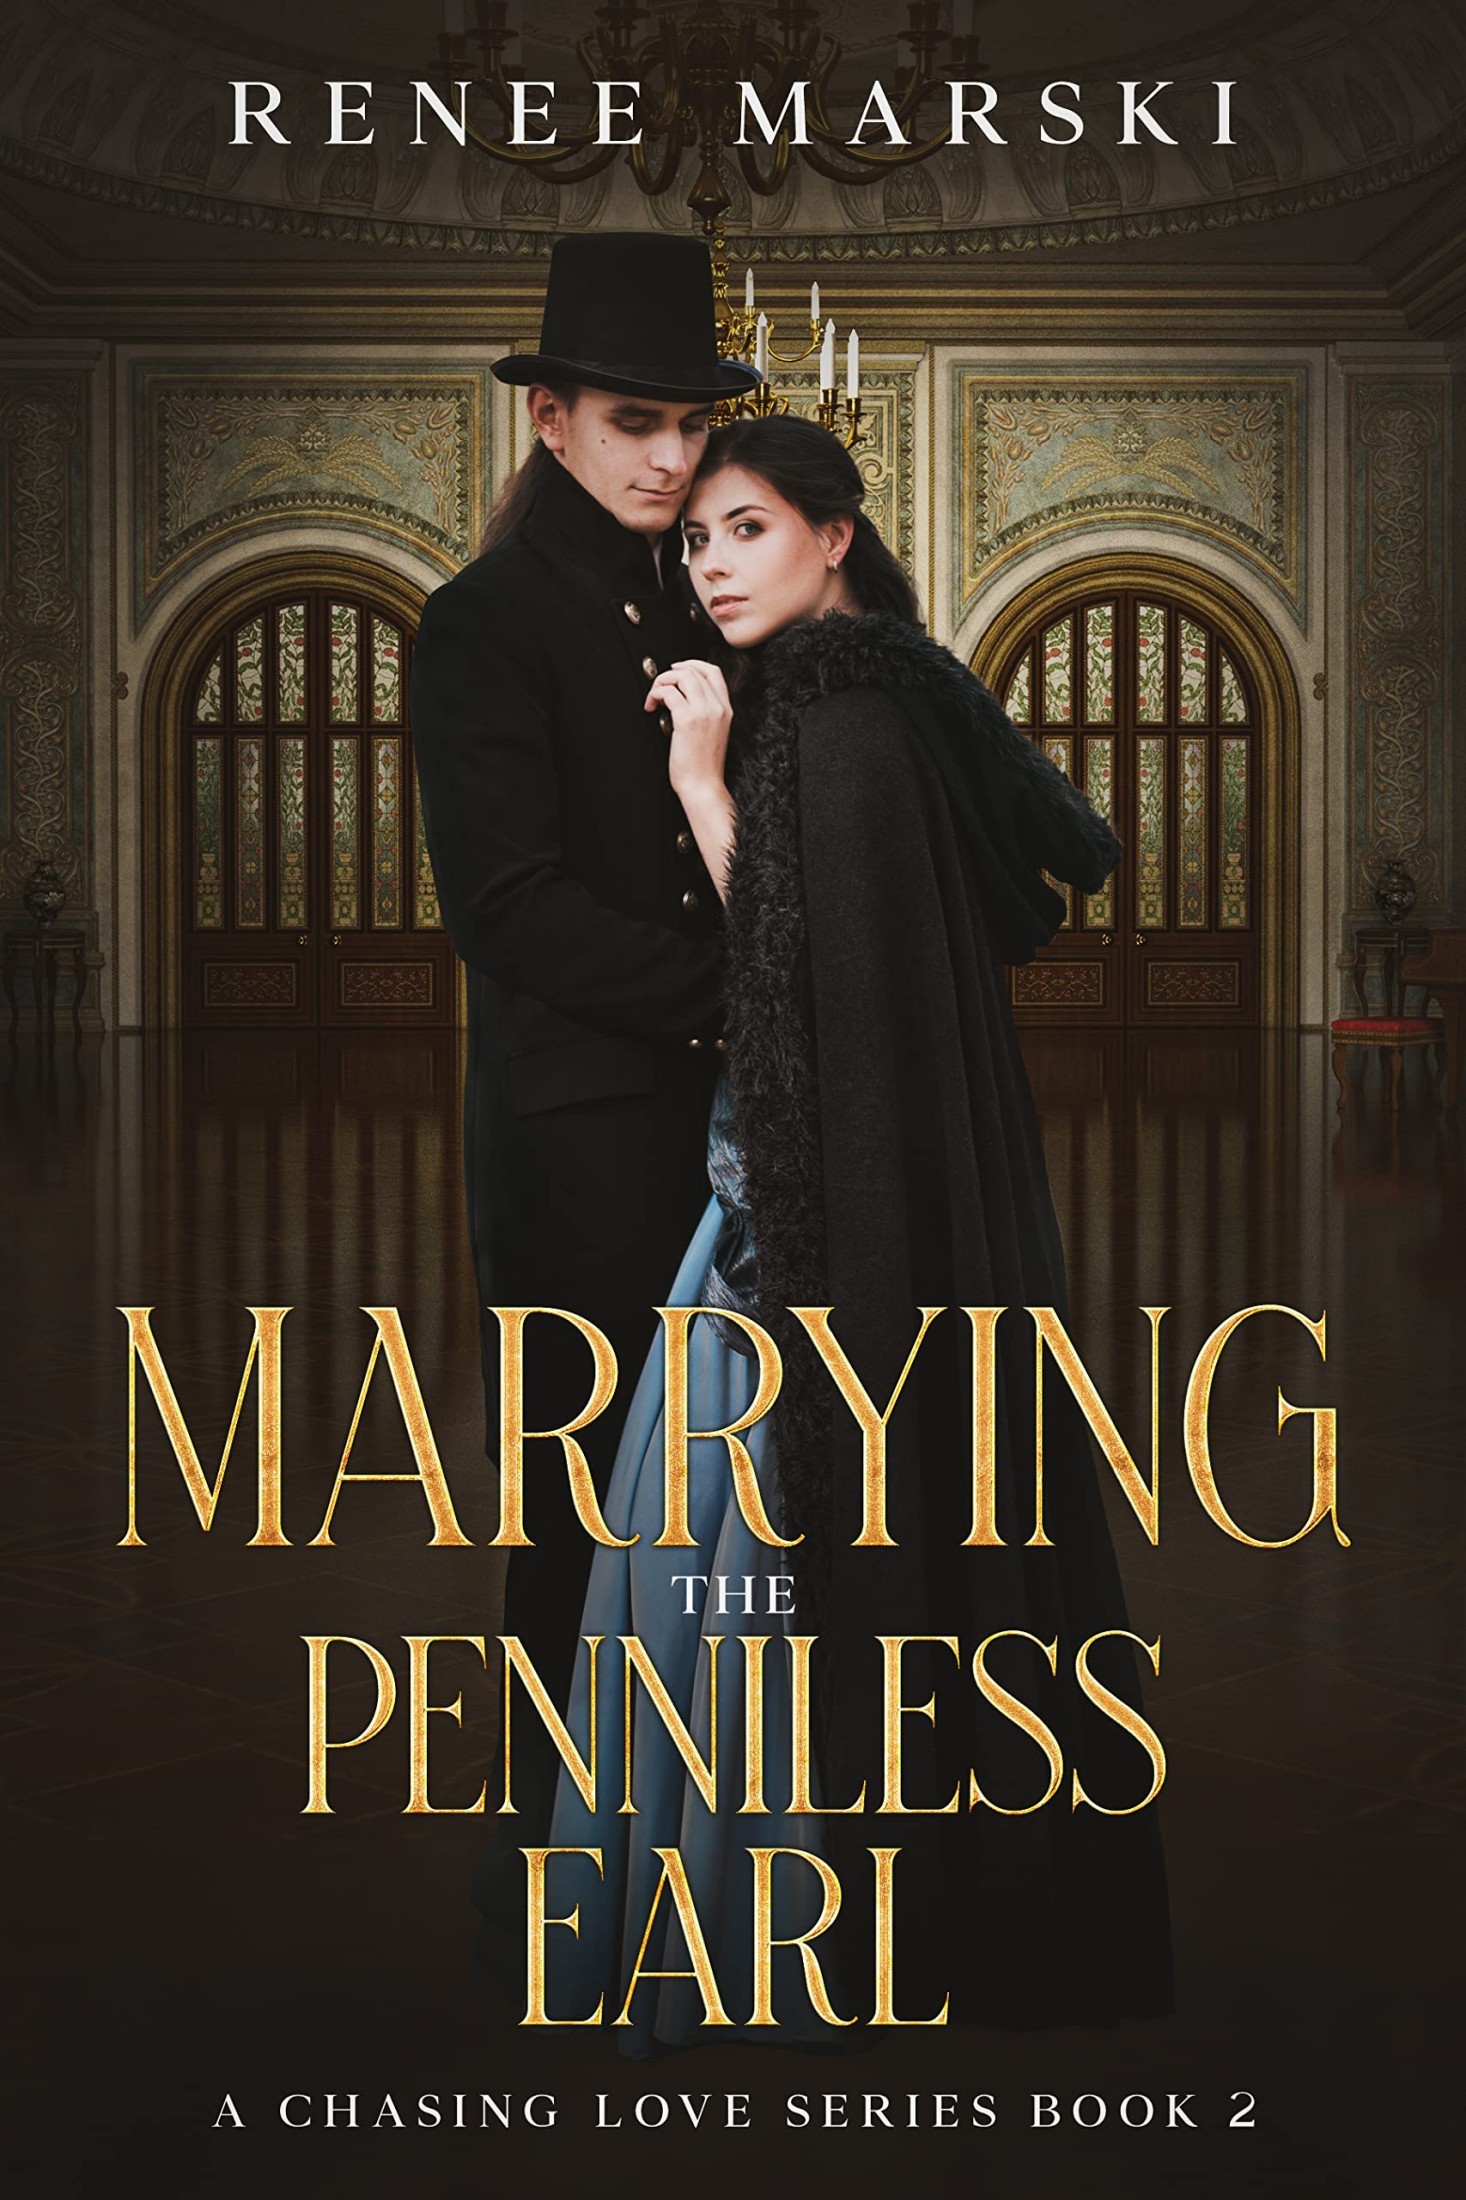 Marrying the Penniless Earl